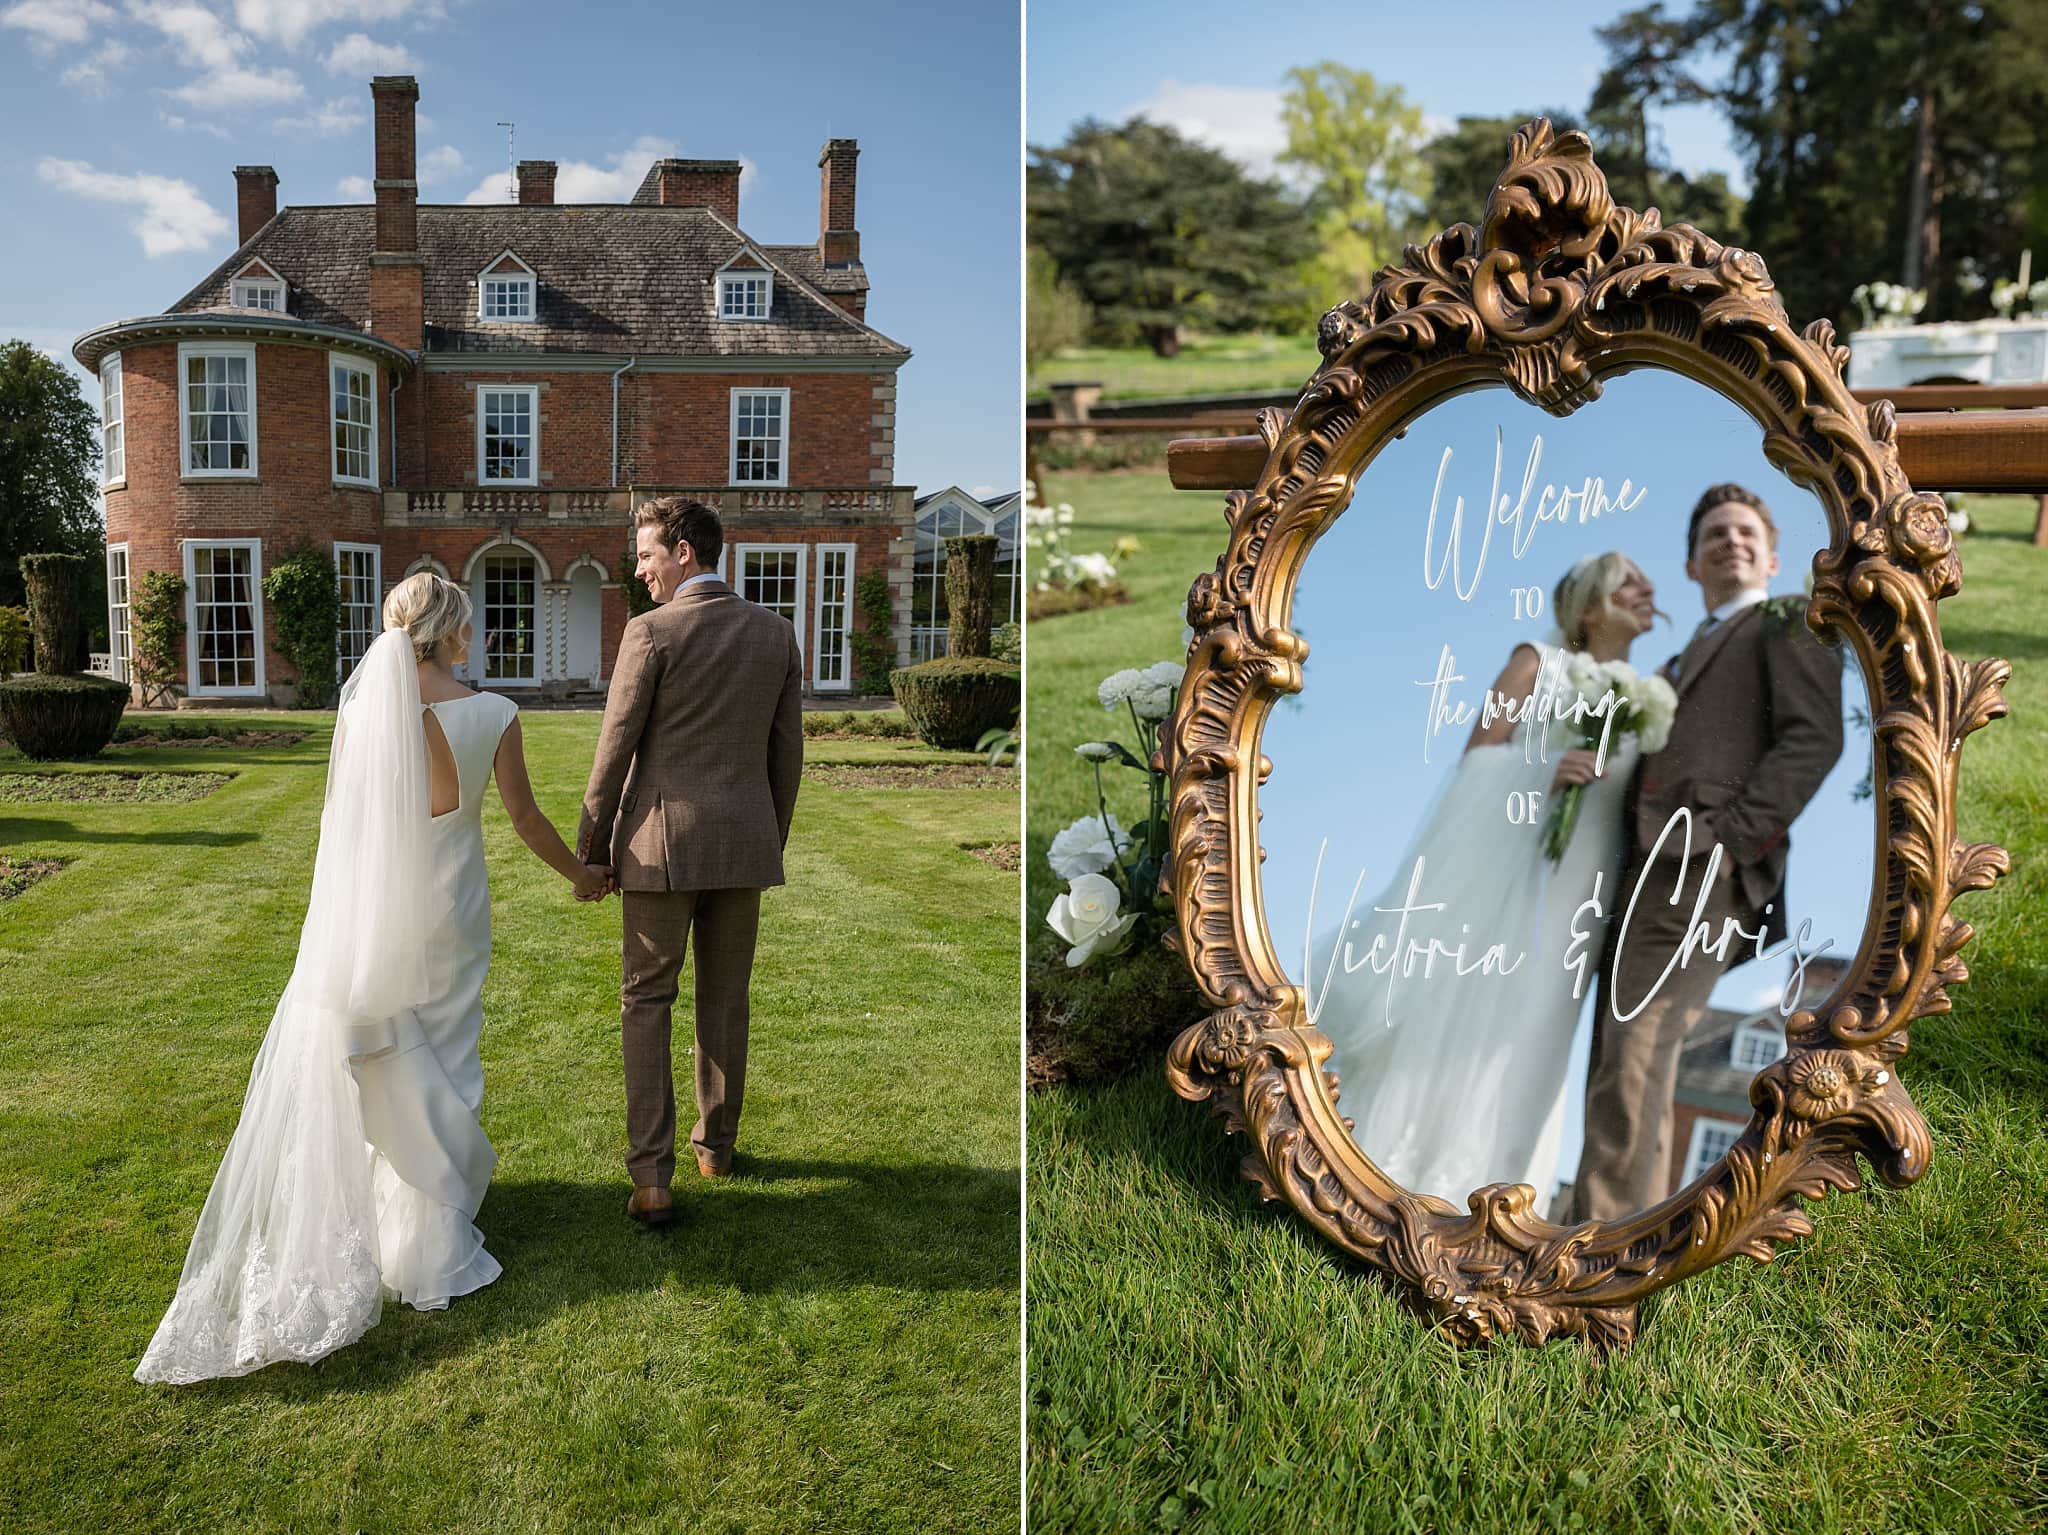 Reflection of a bride and groom in a mirror with the words 'welcome to the wedding of Victoria and Chris'